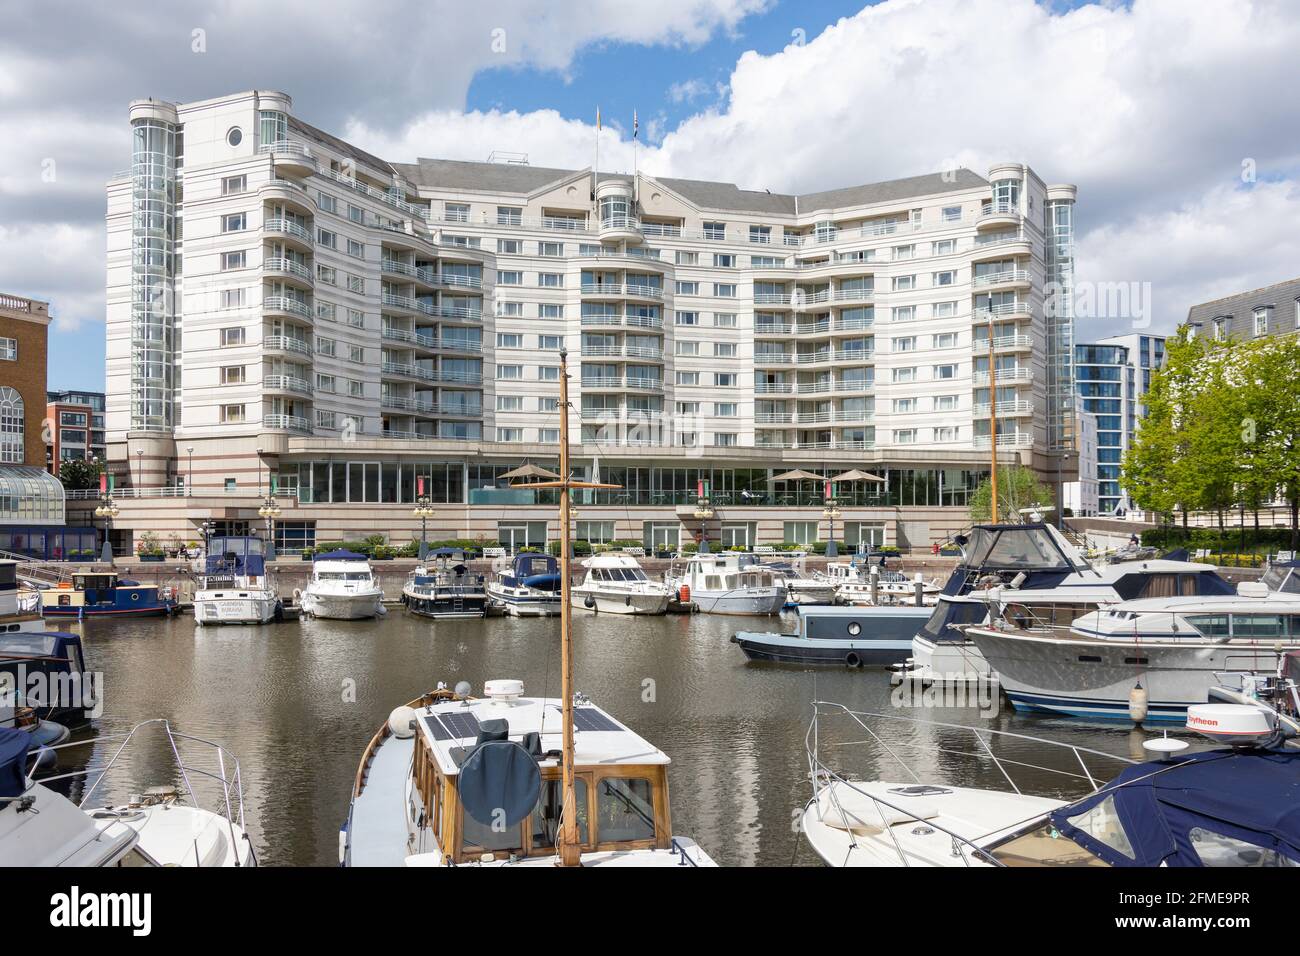 The Chelsea Harbour Hotel from Marina, Chelsea Harbour, Sands End, Borough of Hammersmith and Fulham, Greater London, England, United Kingdom Stock Photo